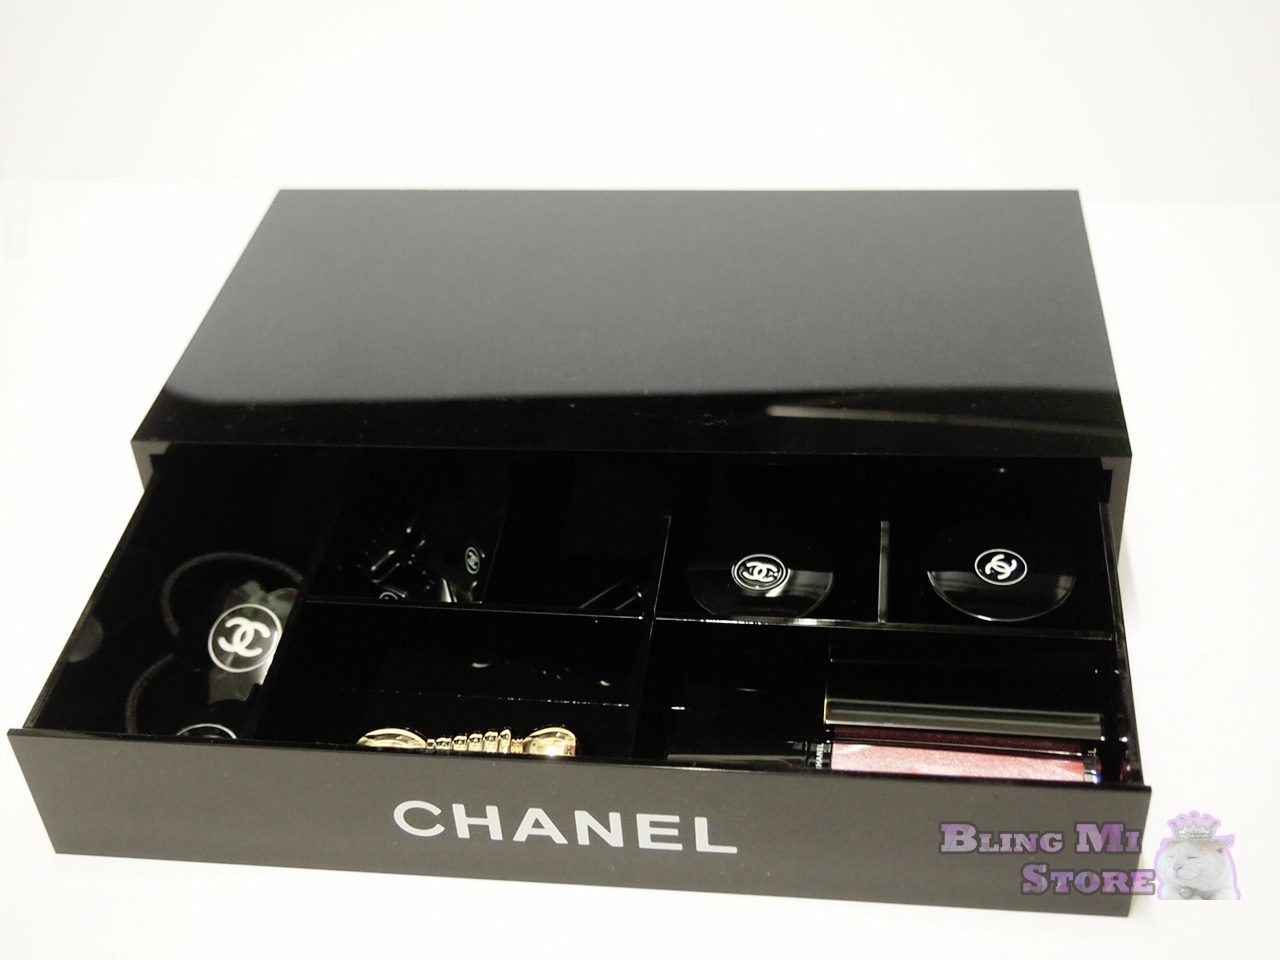 Chanel VIP Classic gift item Black White Cosmetic Makeup Jewelry Case/Box/ Tray /Organizer